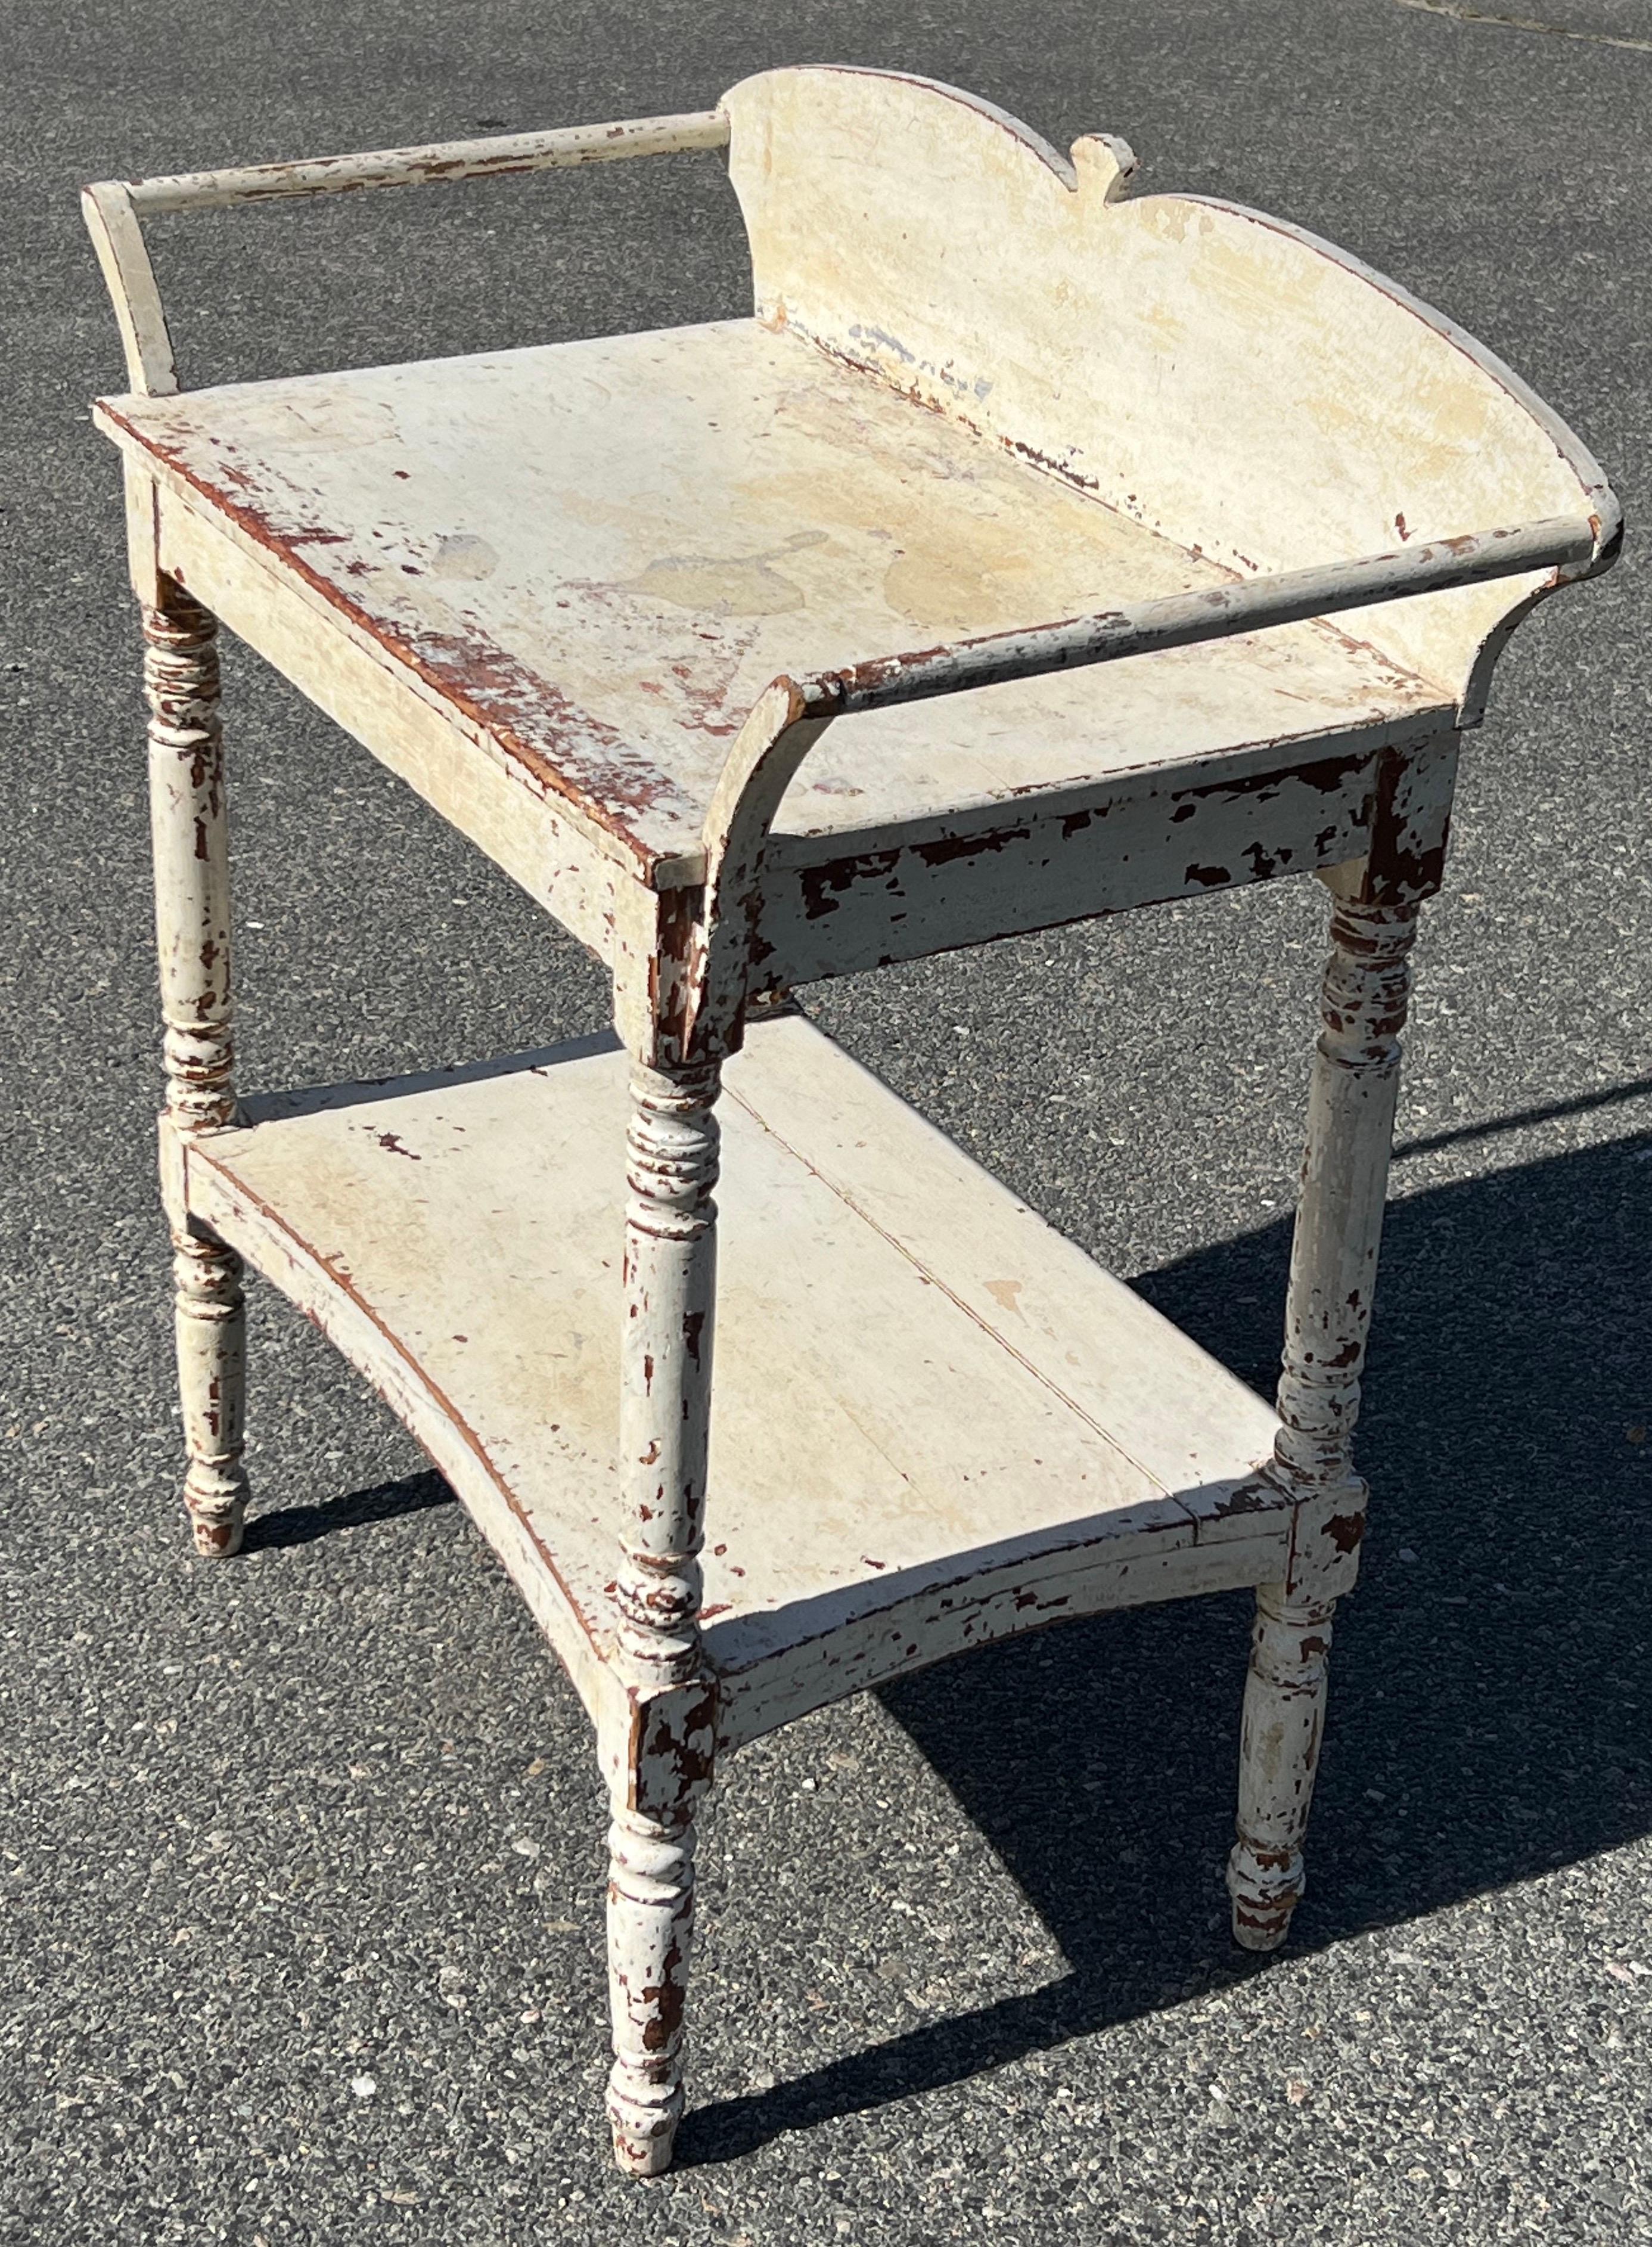 19th century Washstand with two tiers. Nicely shaped rear backsplash with spindles on either side. In original white paints, on turned legs. Surface height 29.25 inches.